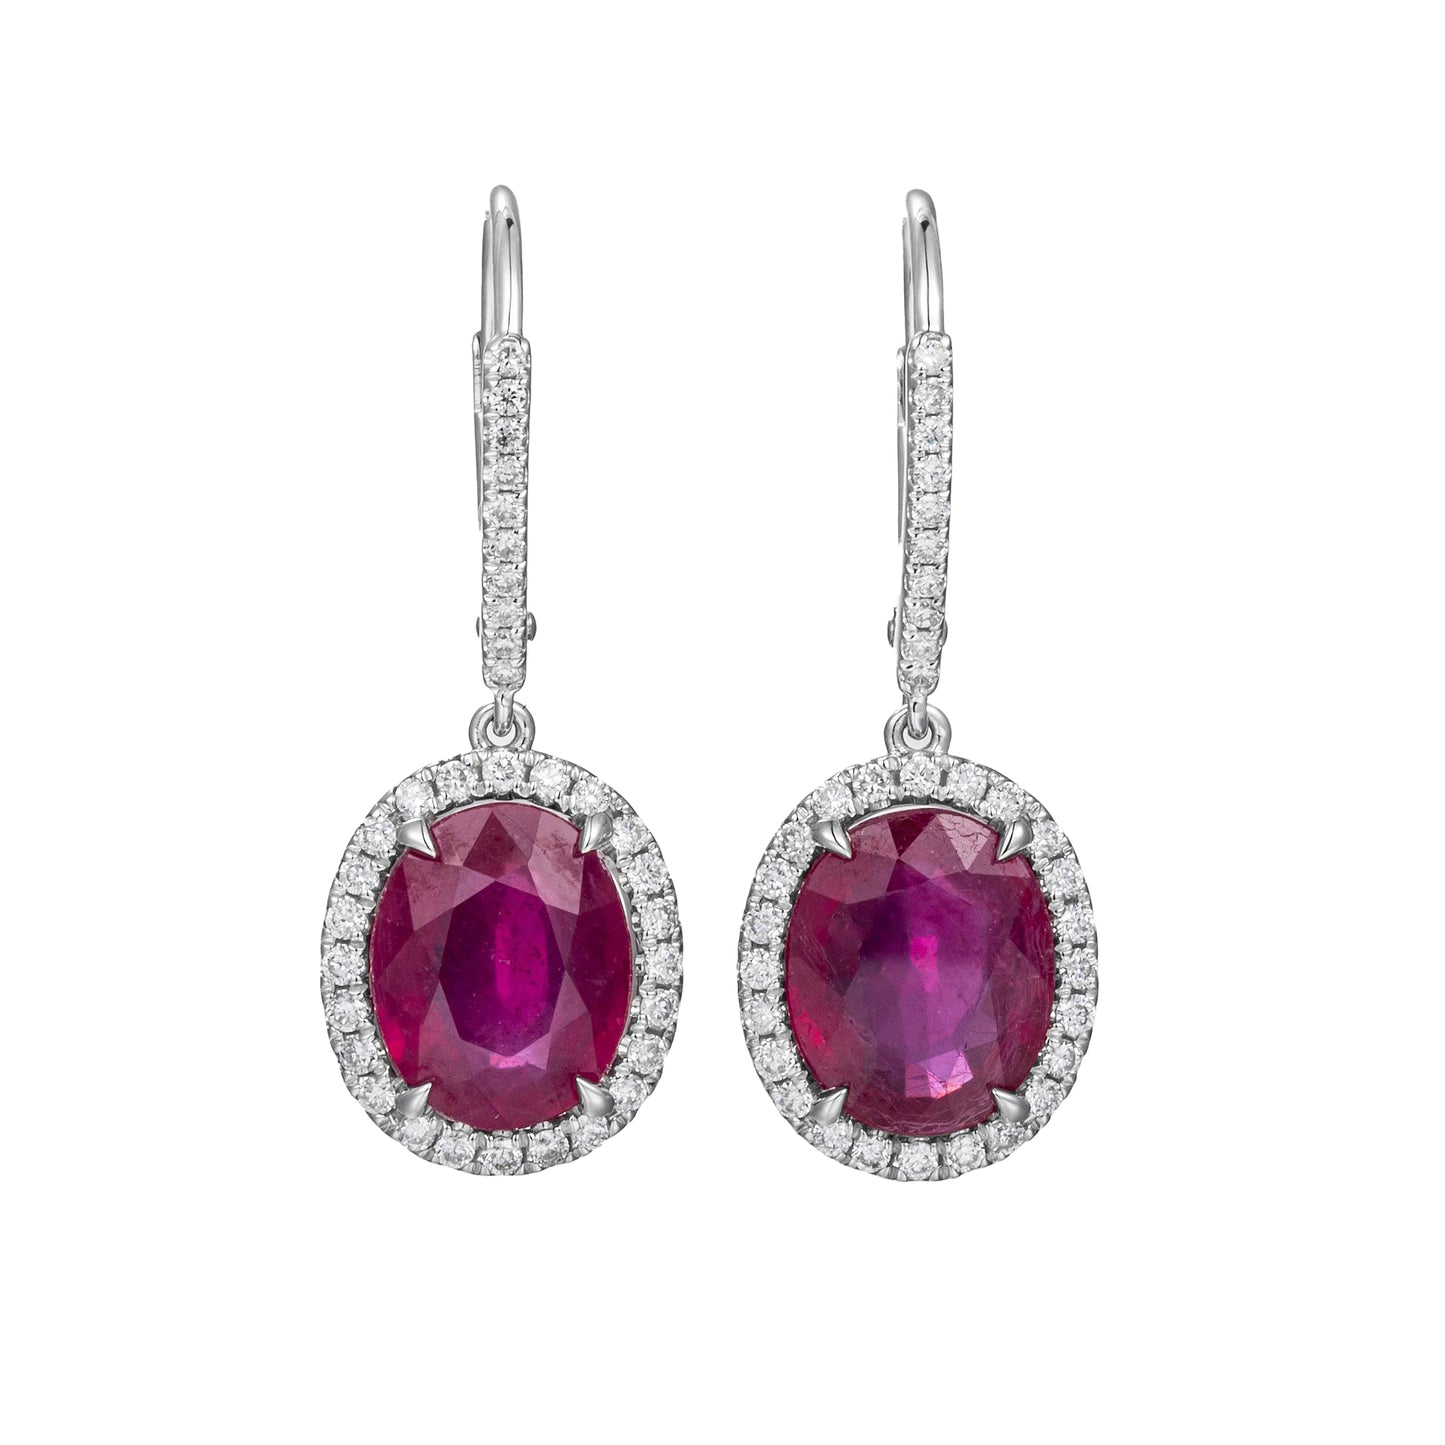 Ruby (Glass Filled) and Diamond Earrings